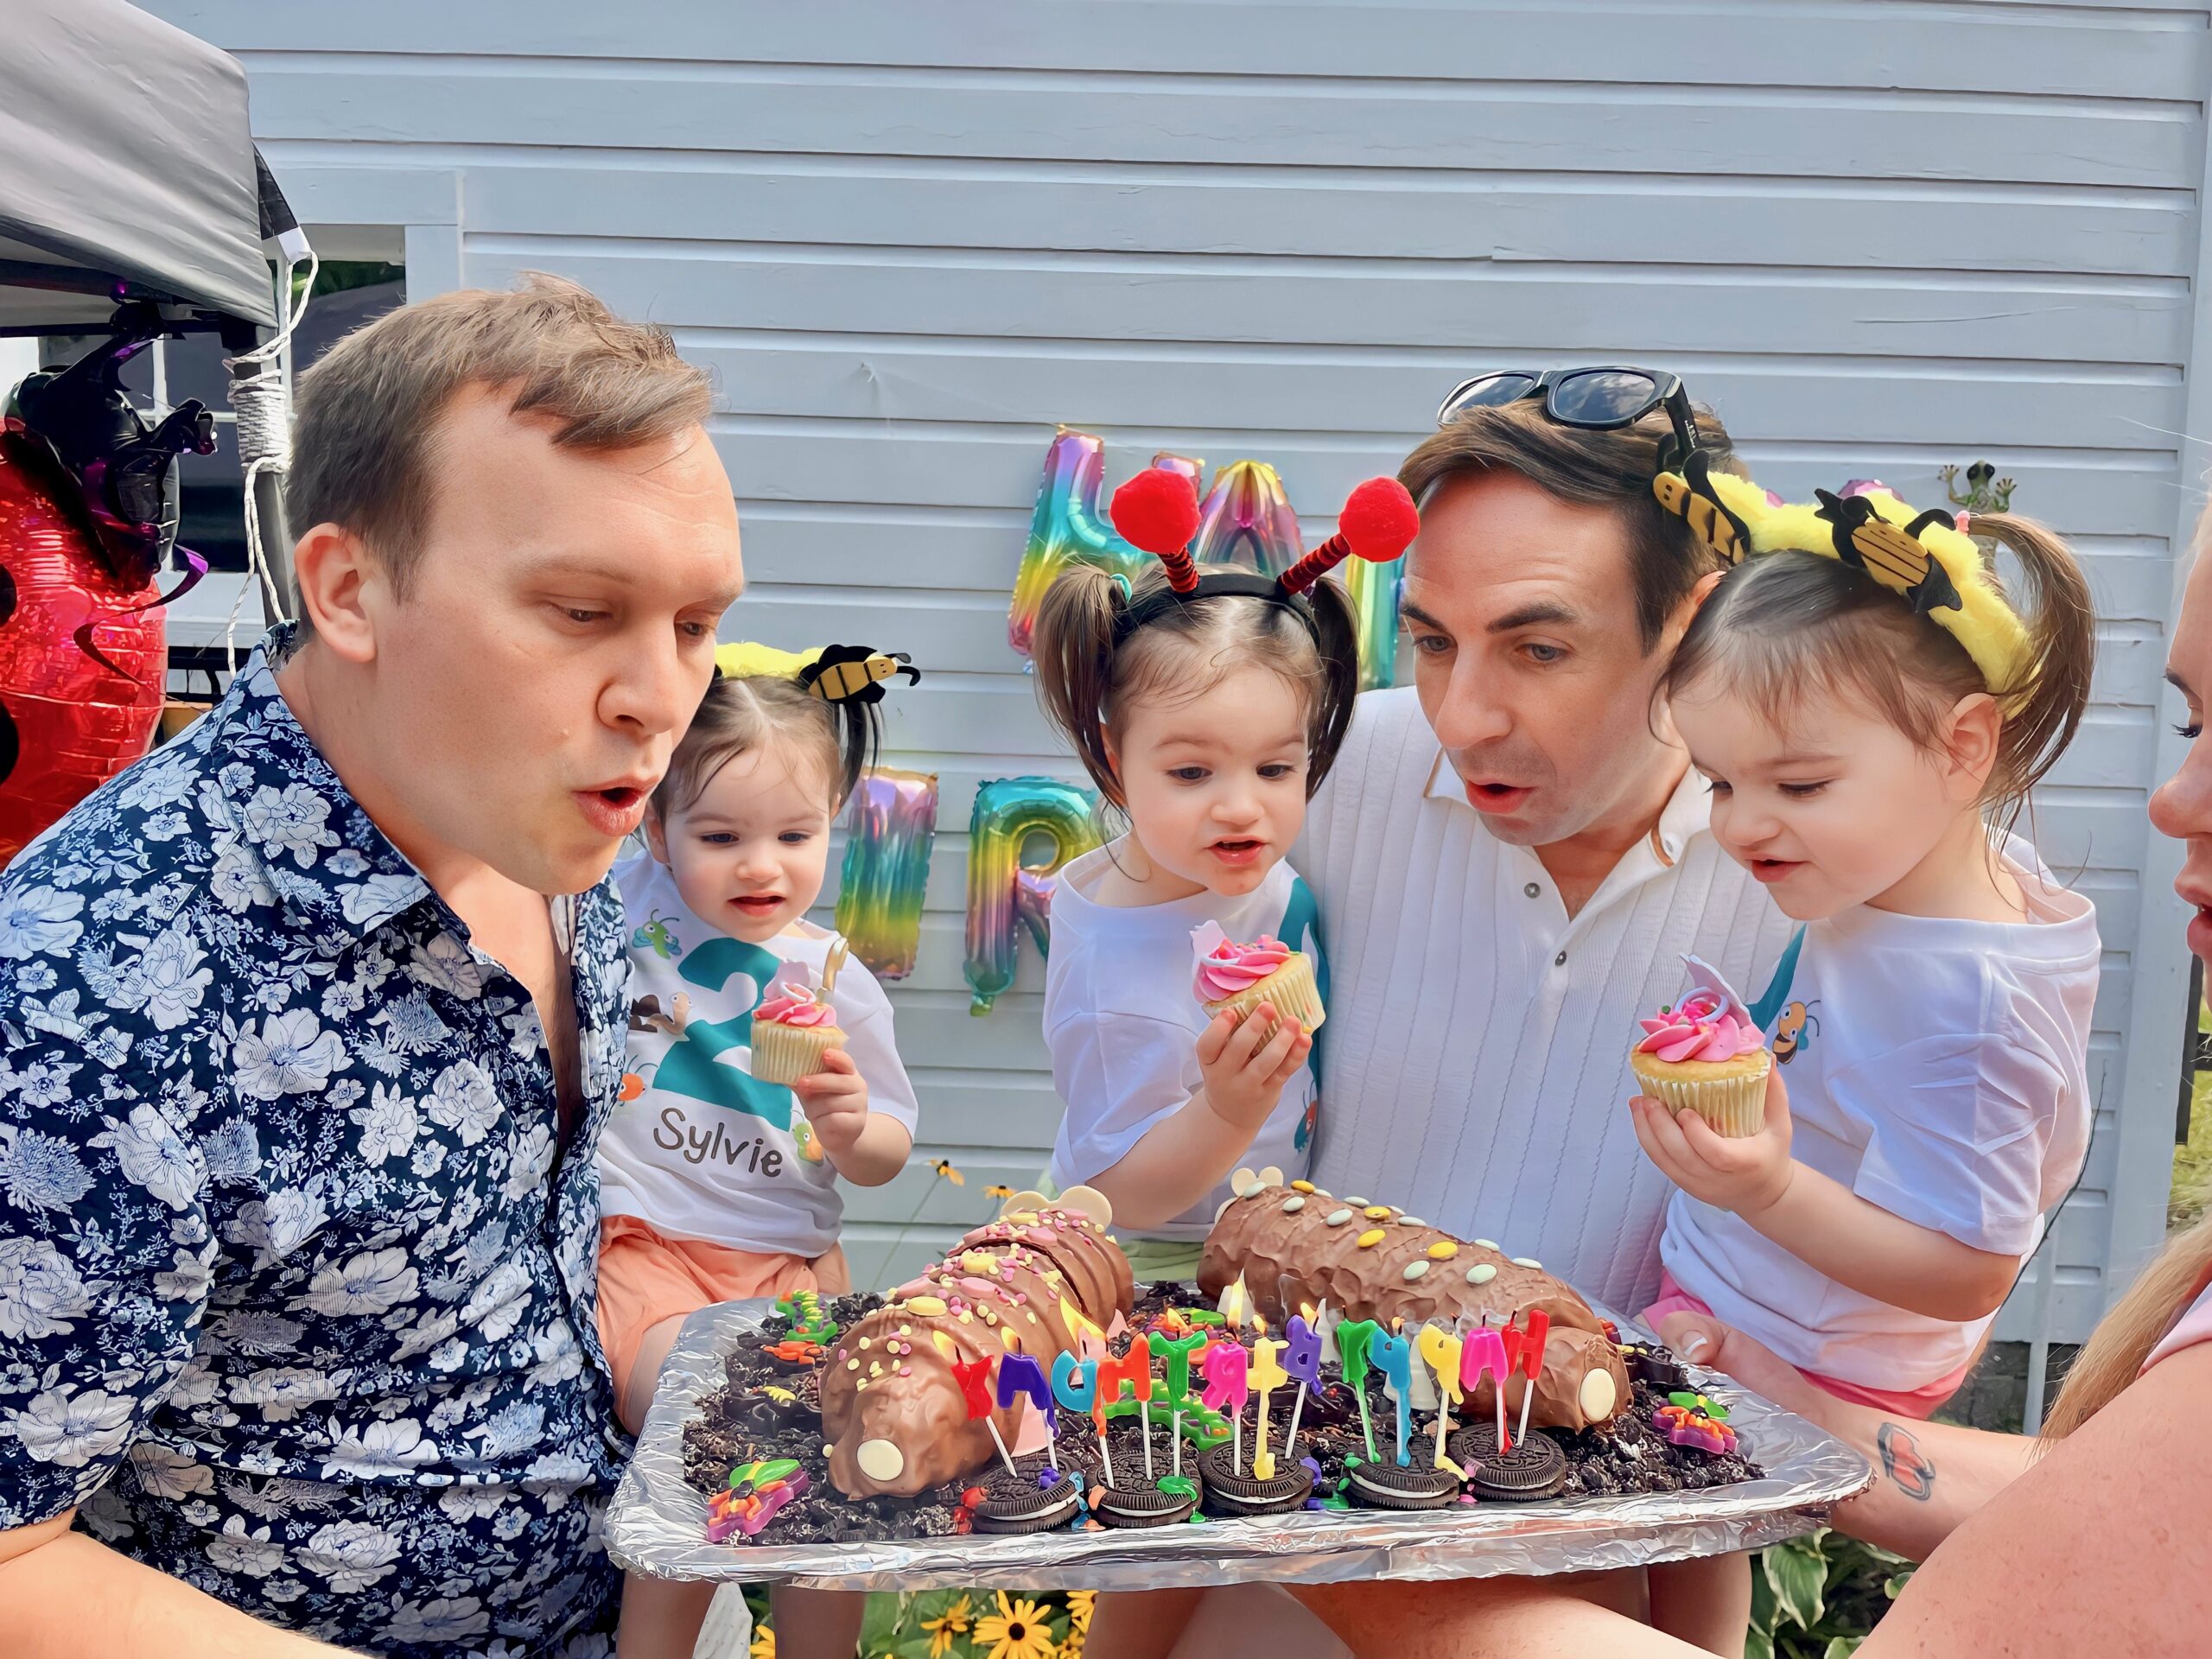 Eric Portenga and Kevin O'Neill with daughters Sylvie, Robin and Parker O'Neill celebrating the girls' 2nd birthday in Sept. 2023. The babies' surrogate lived in Ohio because of Michigan's laws, that are changing now.